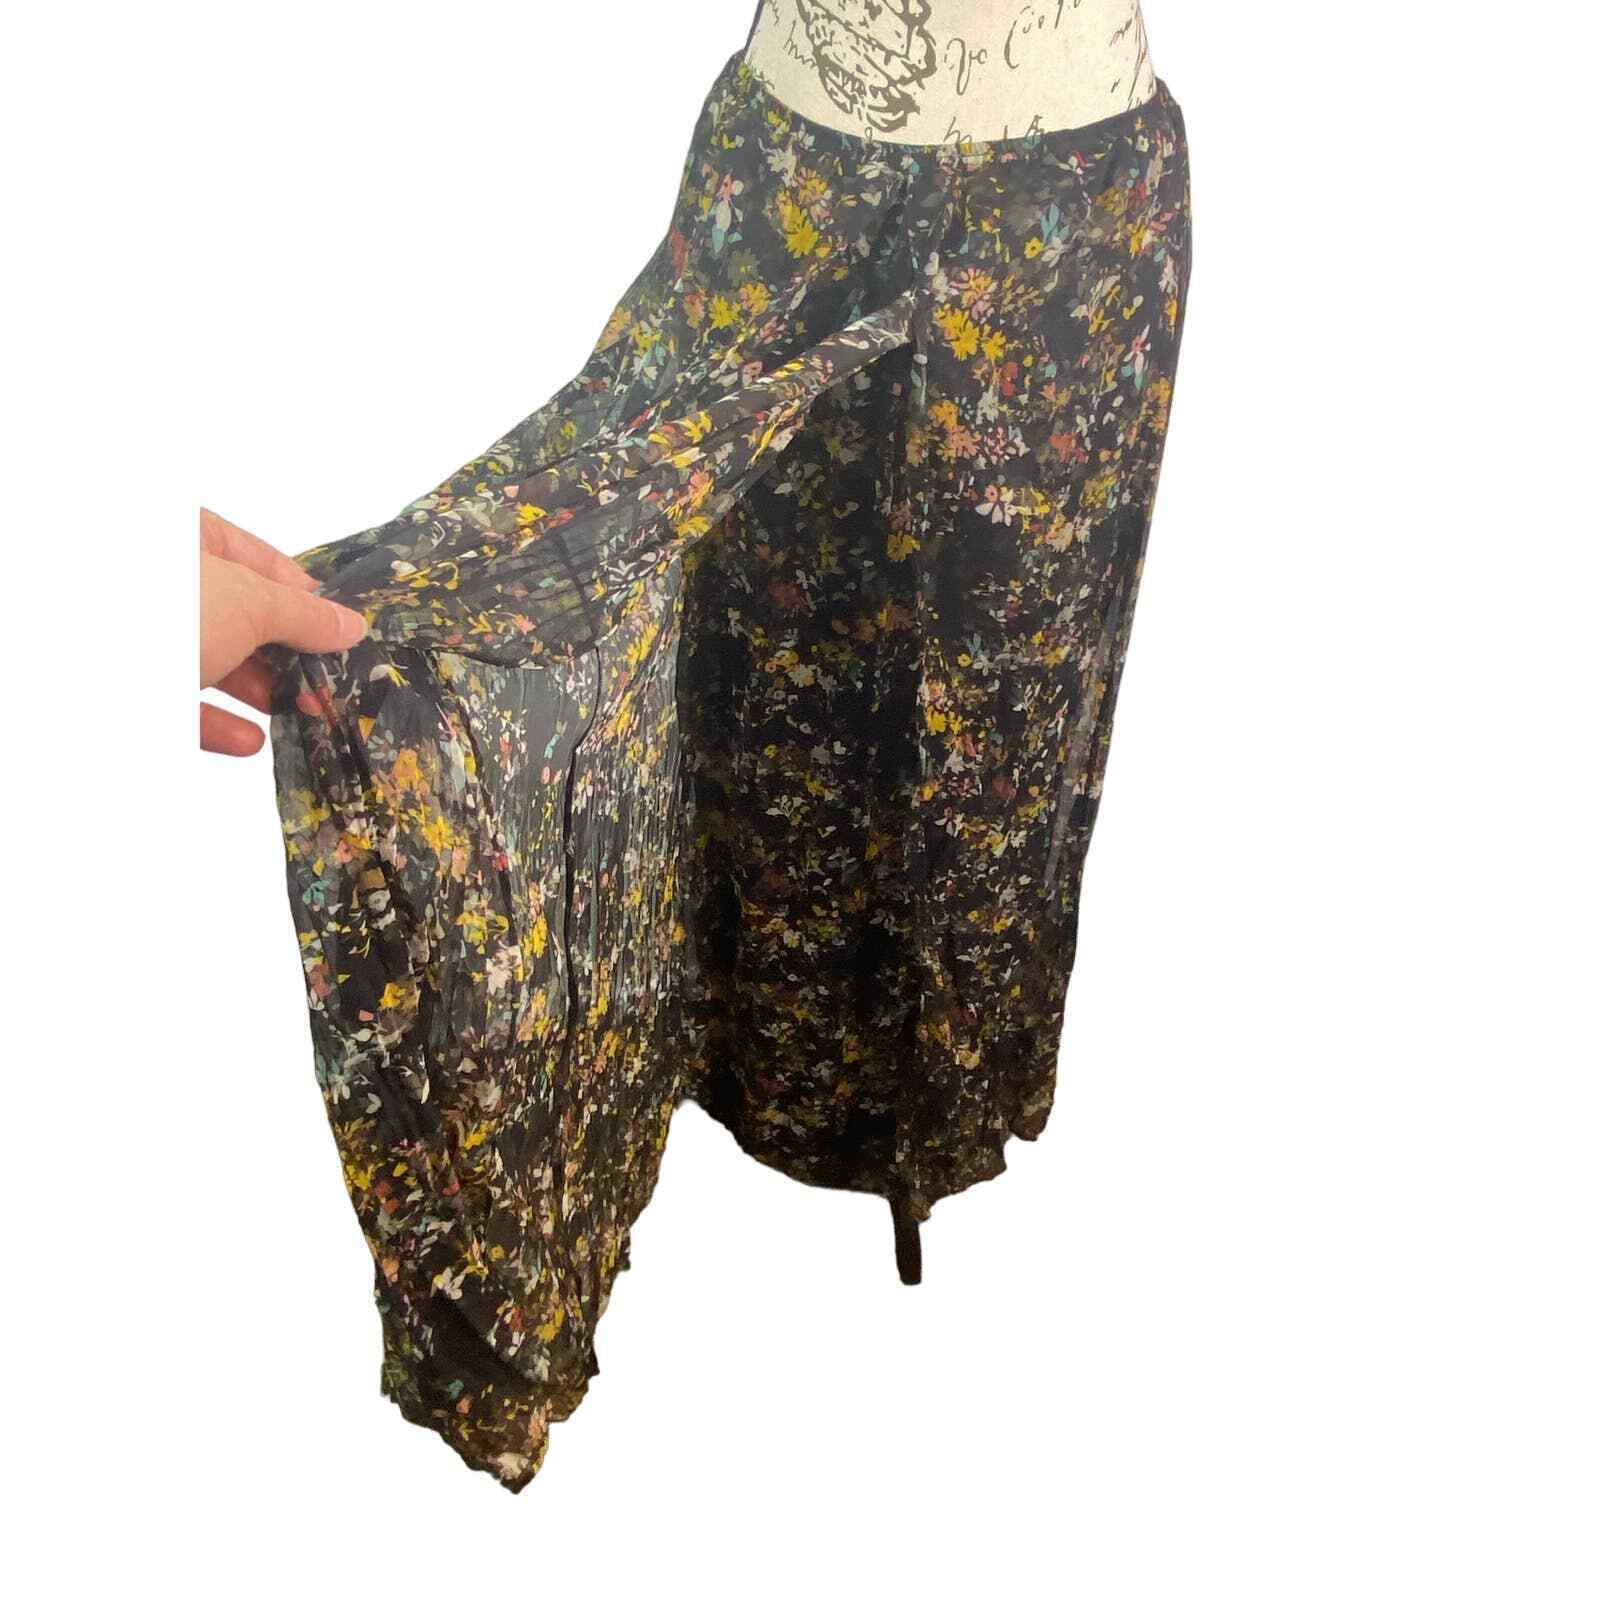 Primary image for Willow & Clay Chiffon Layered Floral Maxi Skirt Lined Rayon USA Women Size L